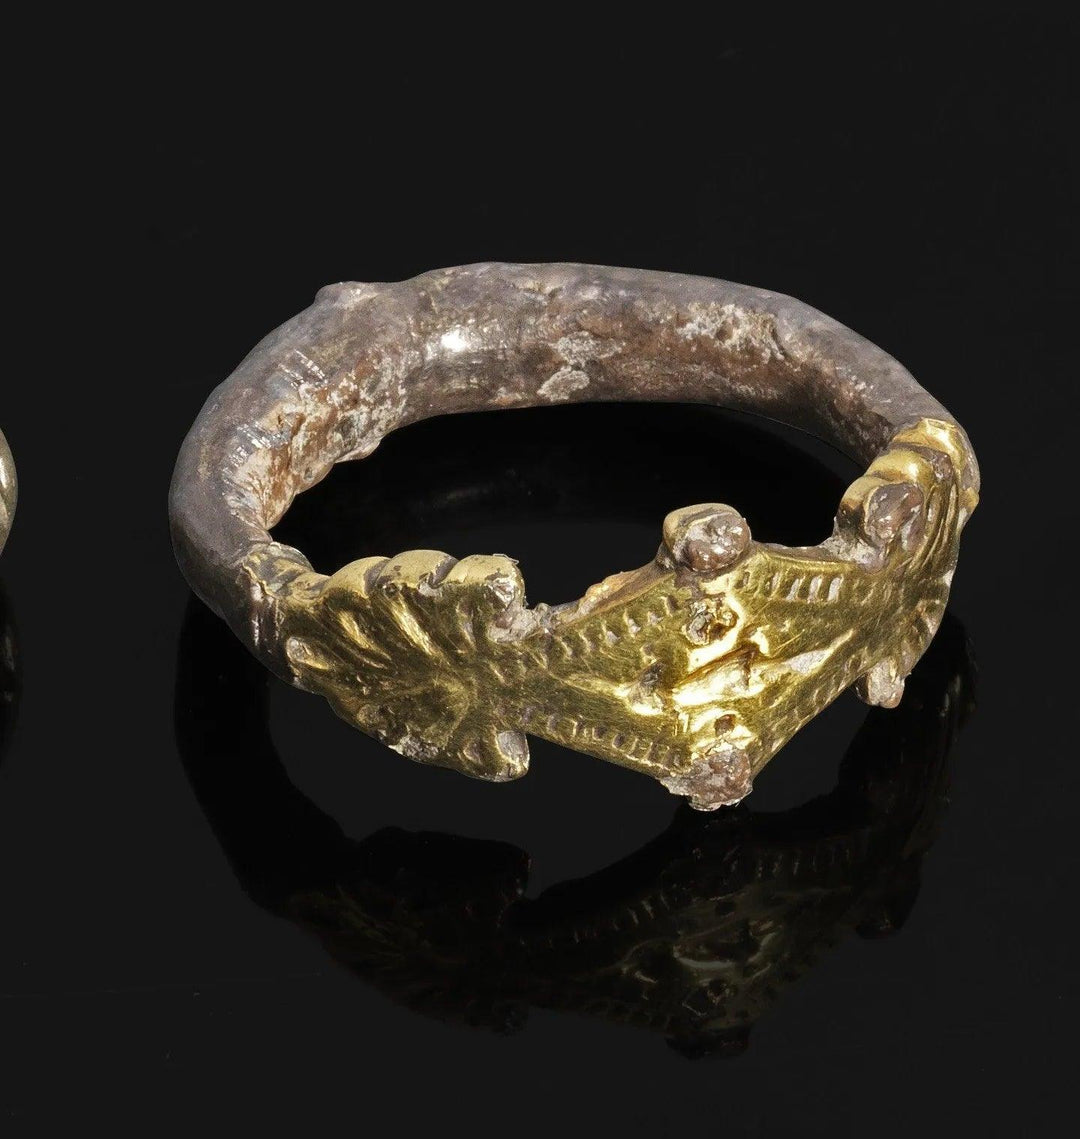 Ancient Greek Gold & Silver Ring with Animal Motif - 6th Century BCE | Exquisite Dual-Metal Craftsmanship